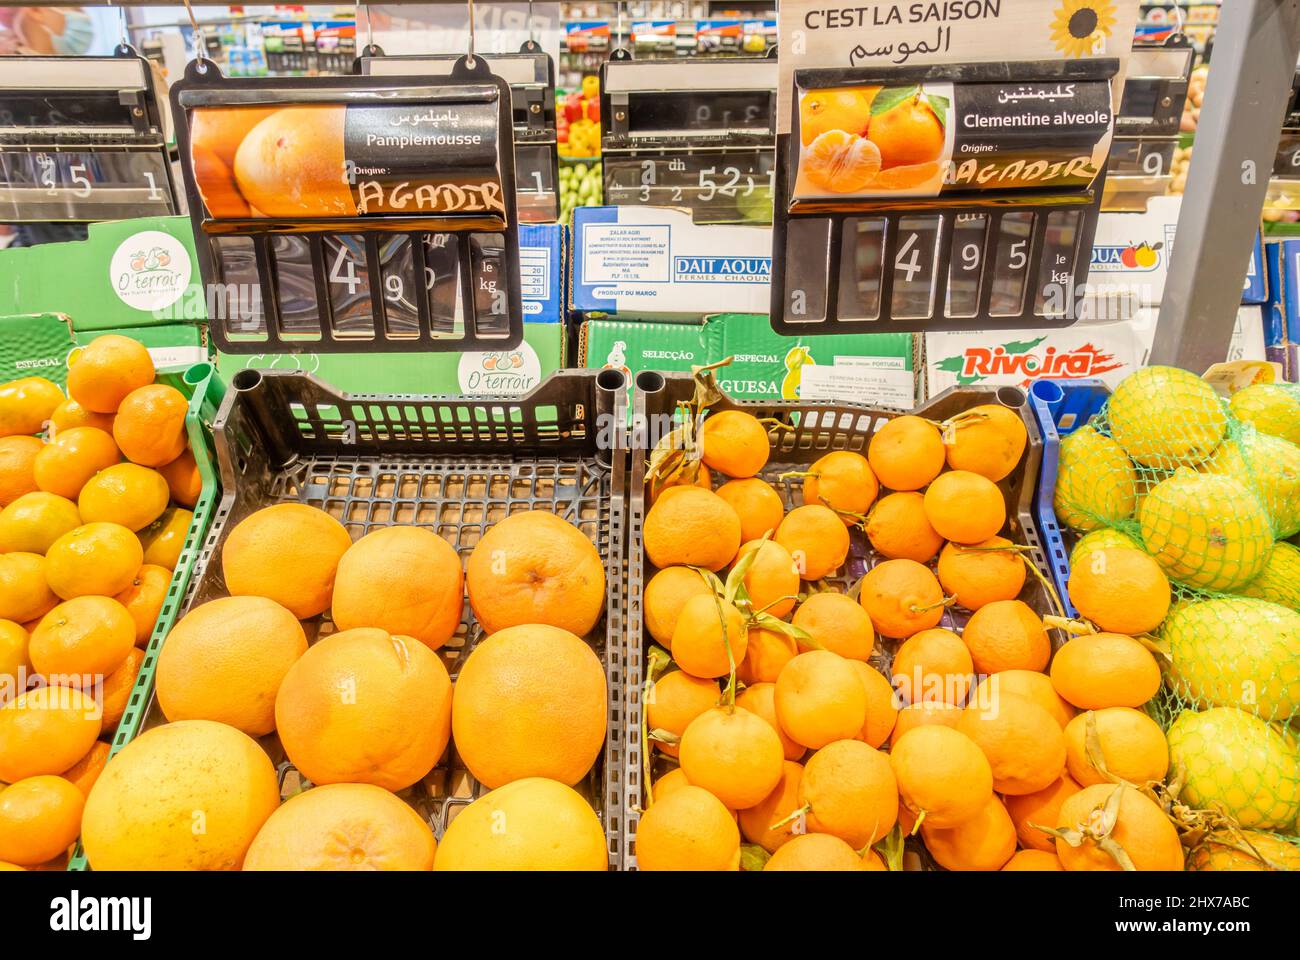 Fruits: oranges, clementines, tangerines sold on display inside the CarreFour supermarket in Marrakech, Morocco Stock Photo